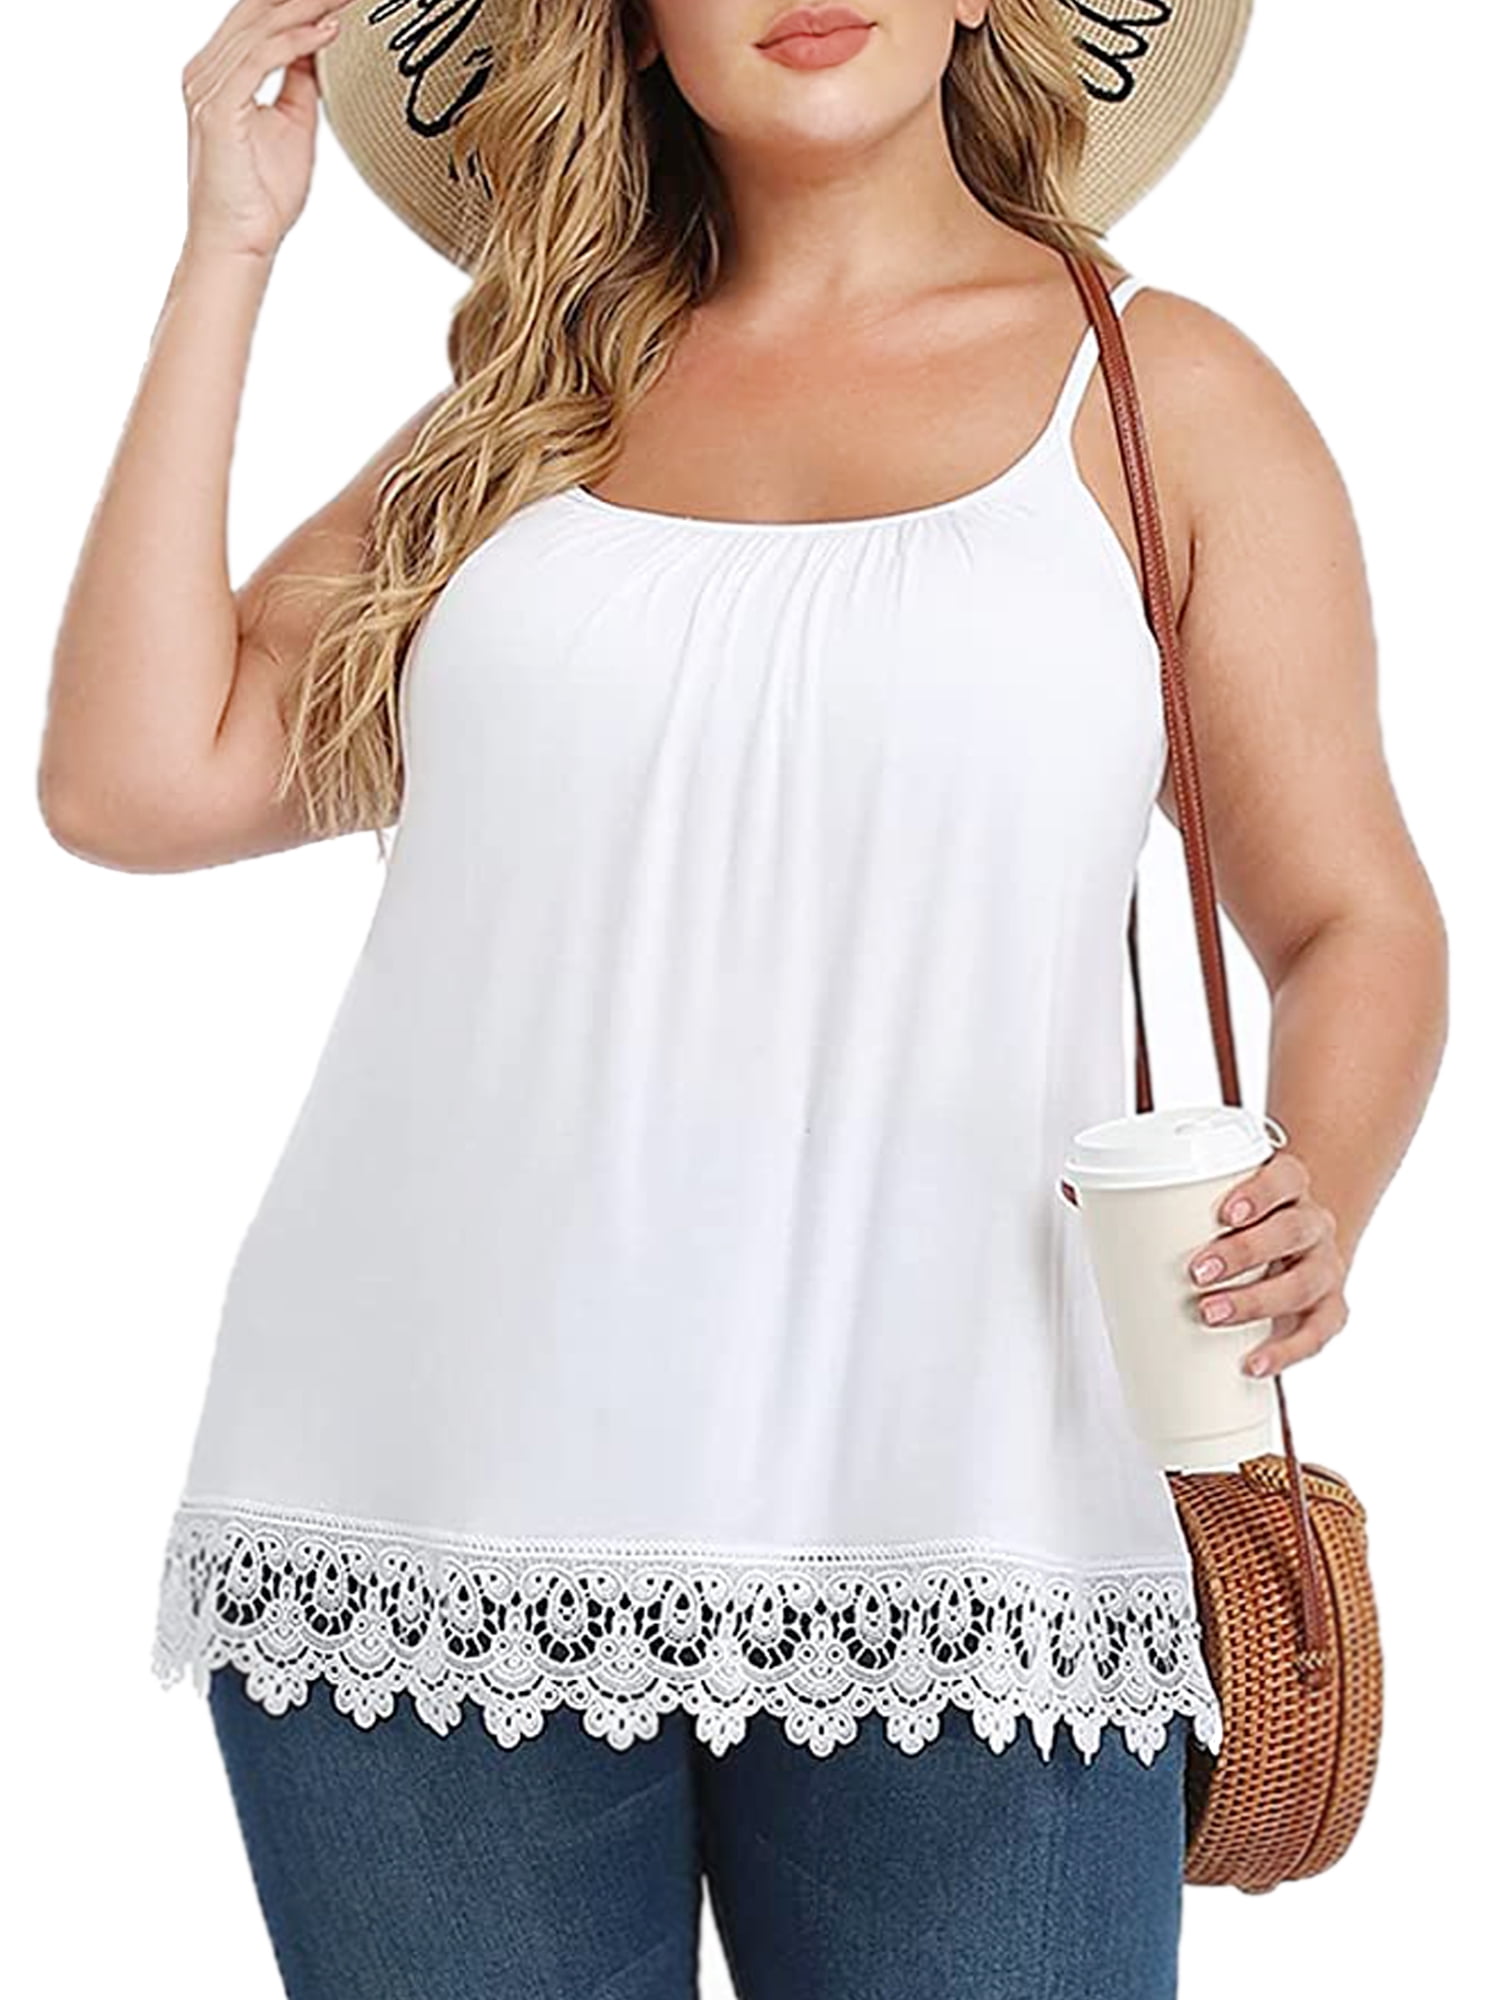 Plus Size Cami Basic Camisole Womens Built in Bra Cup Flowy Swing